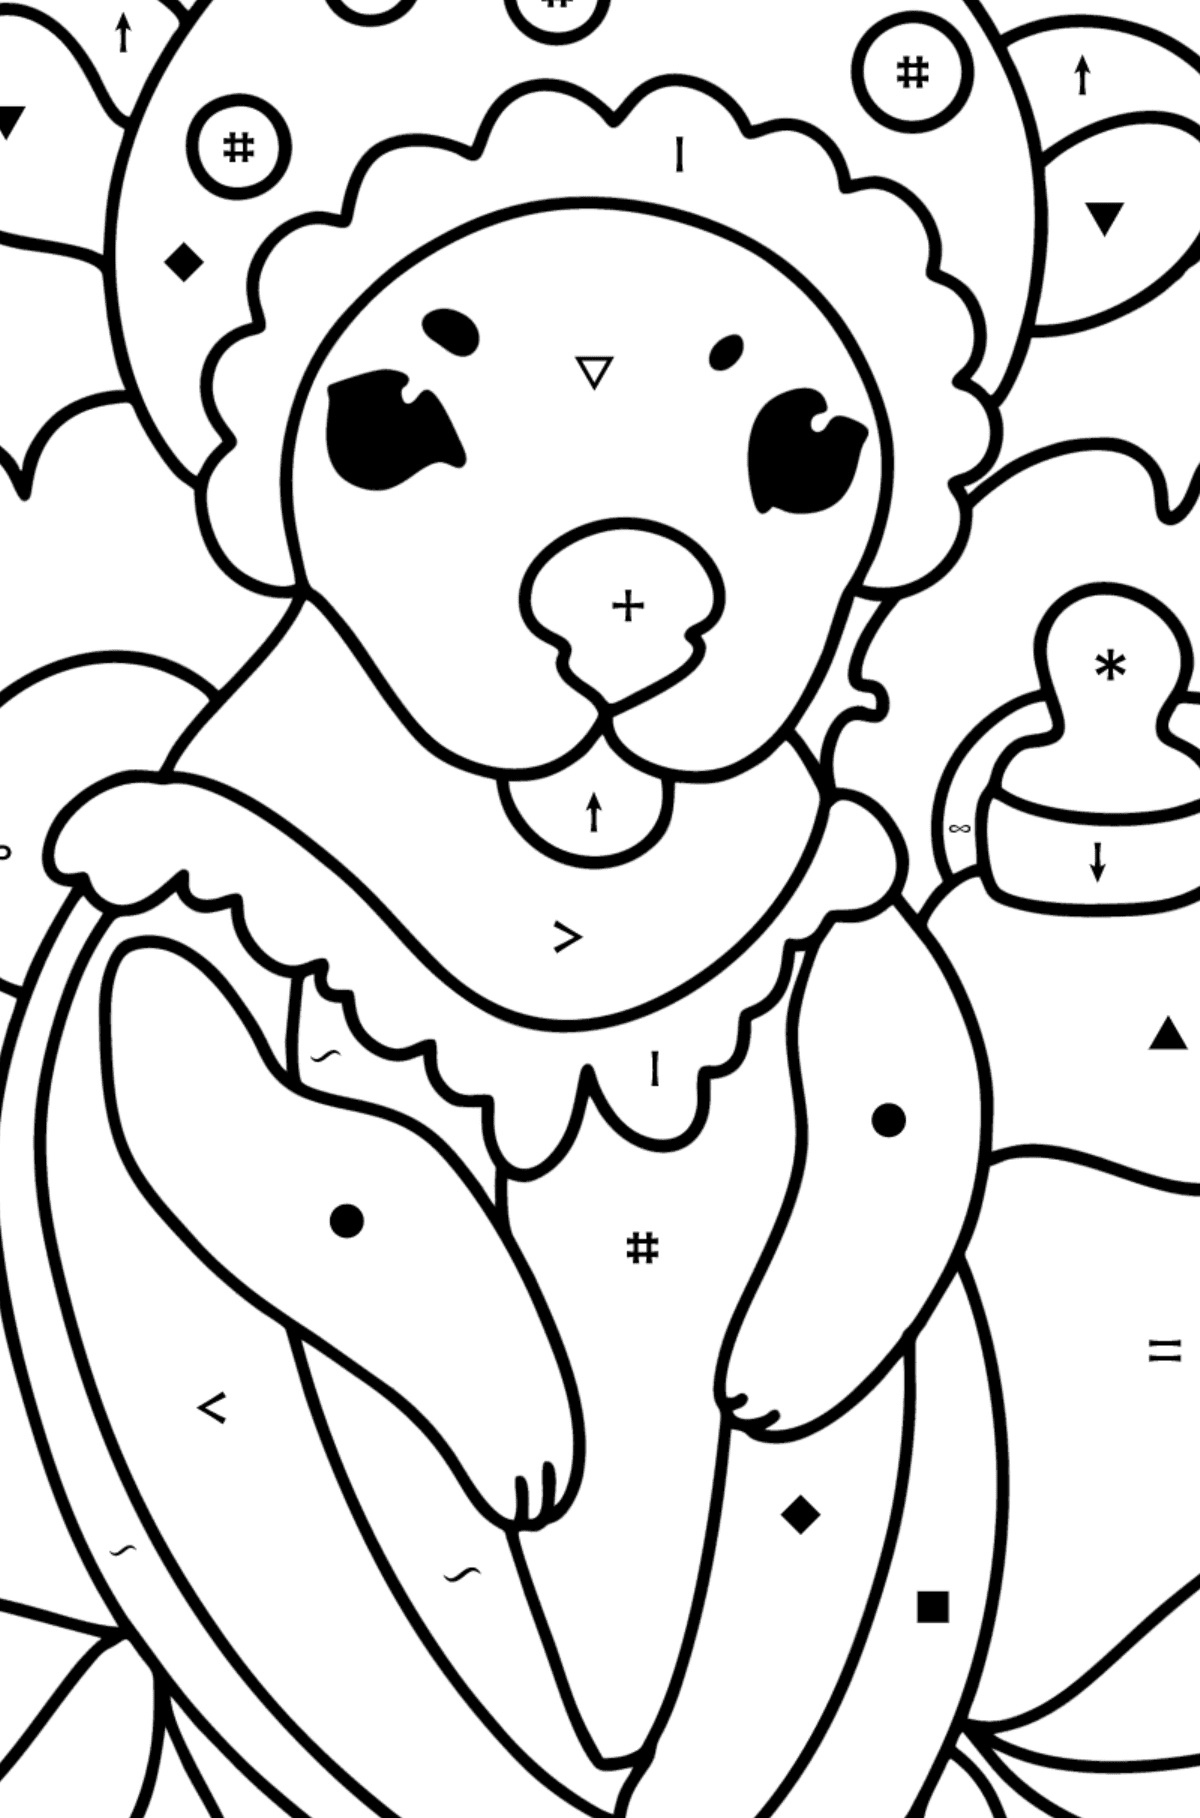 Complex Coloring page - Cartoon Baby Kangaroo - Coloring by Symbols for Kids